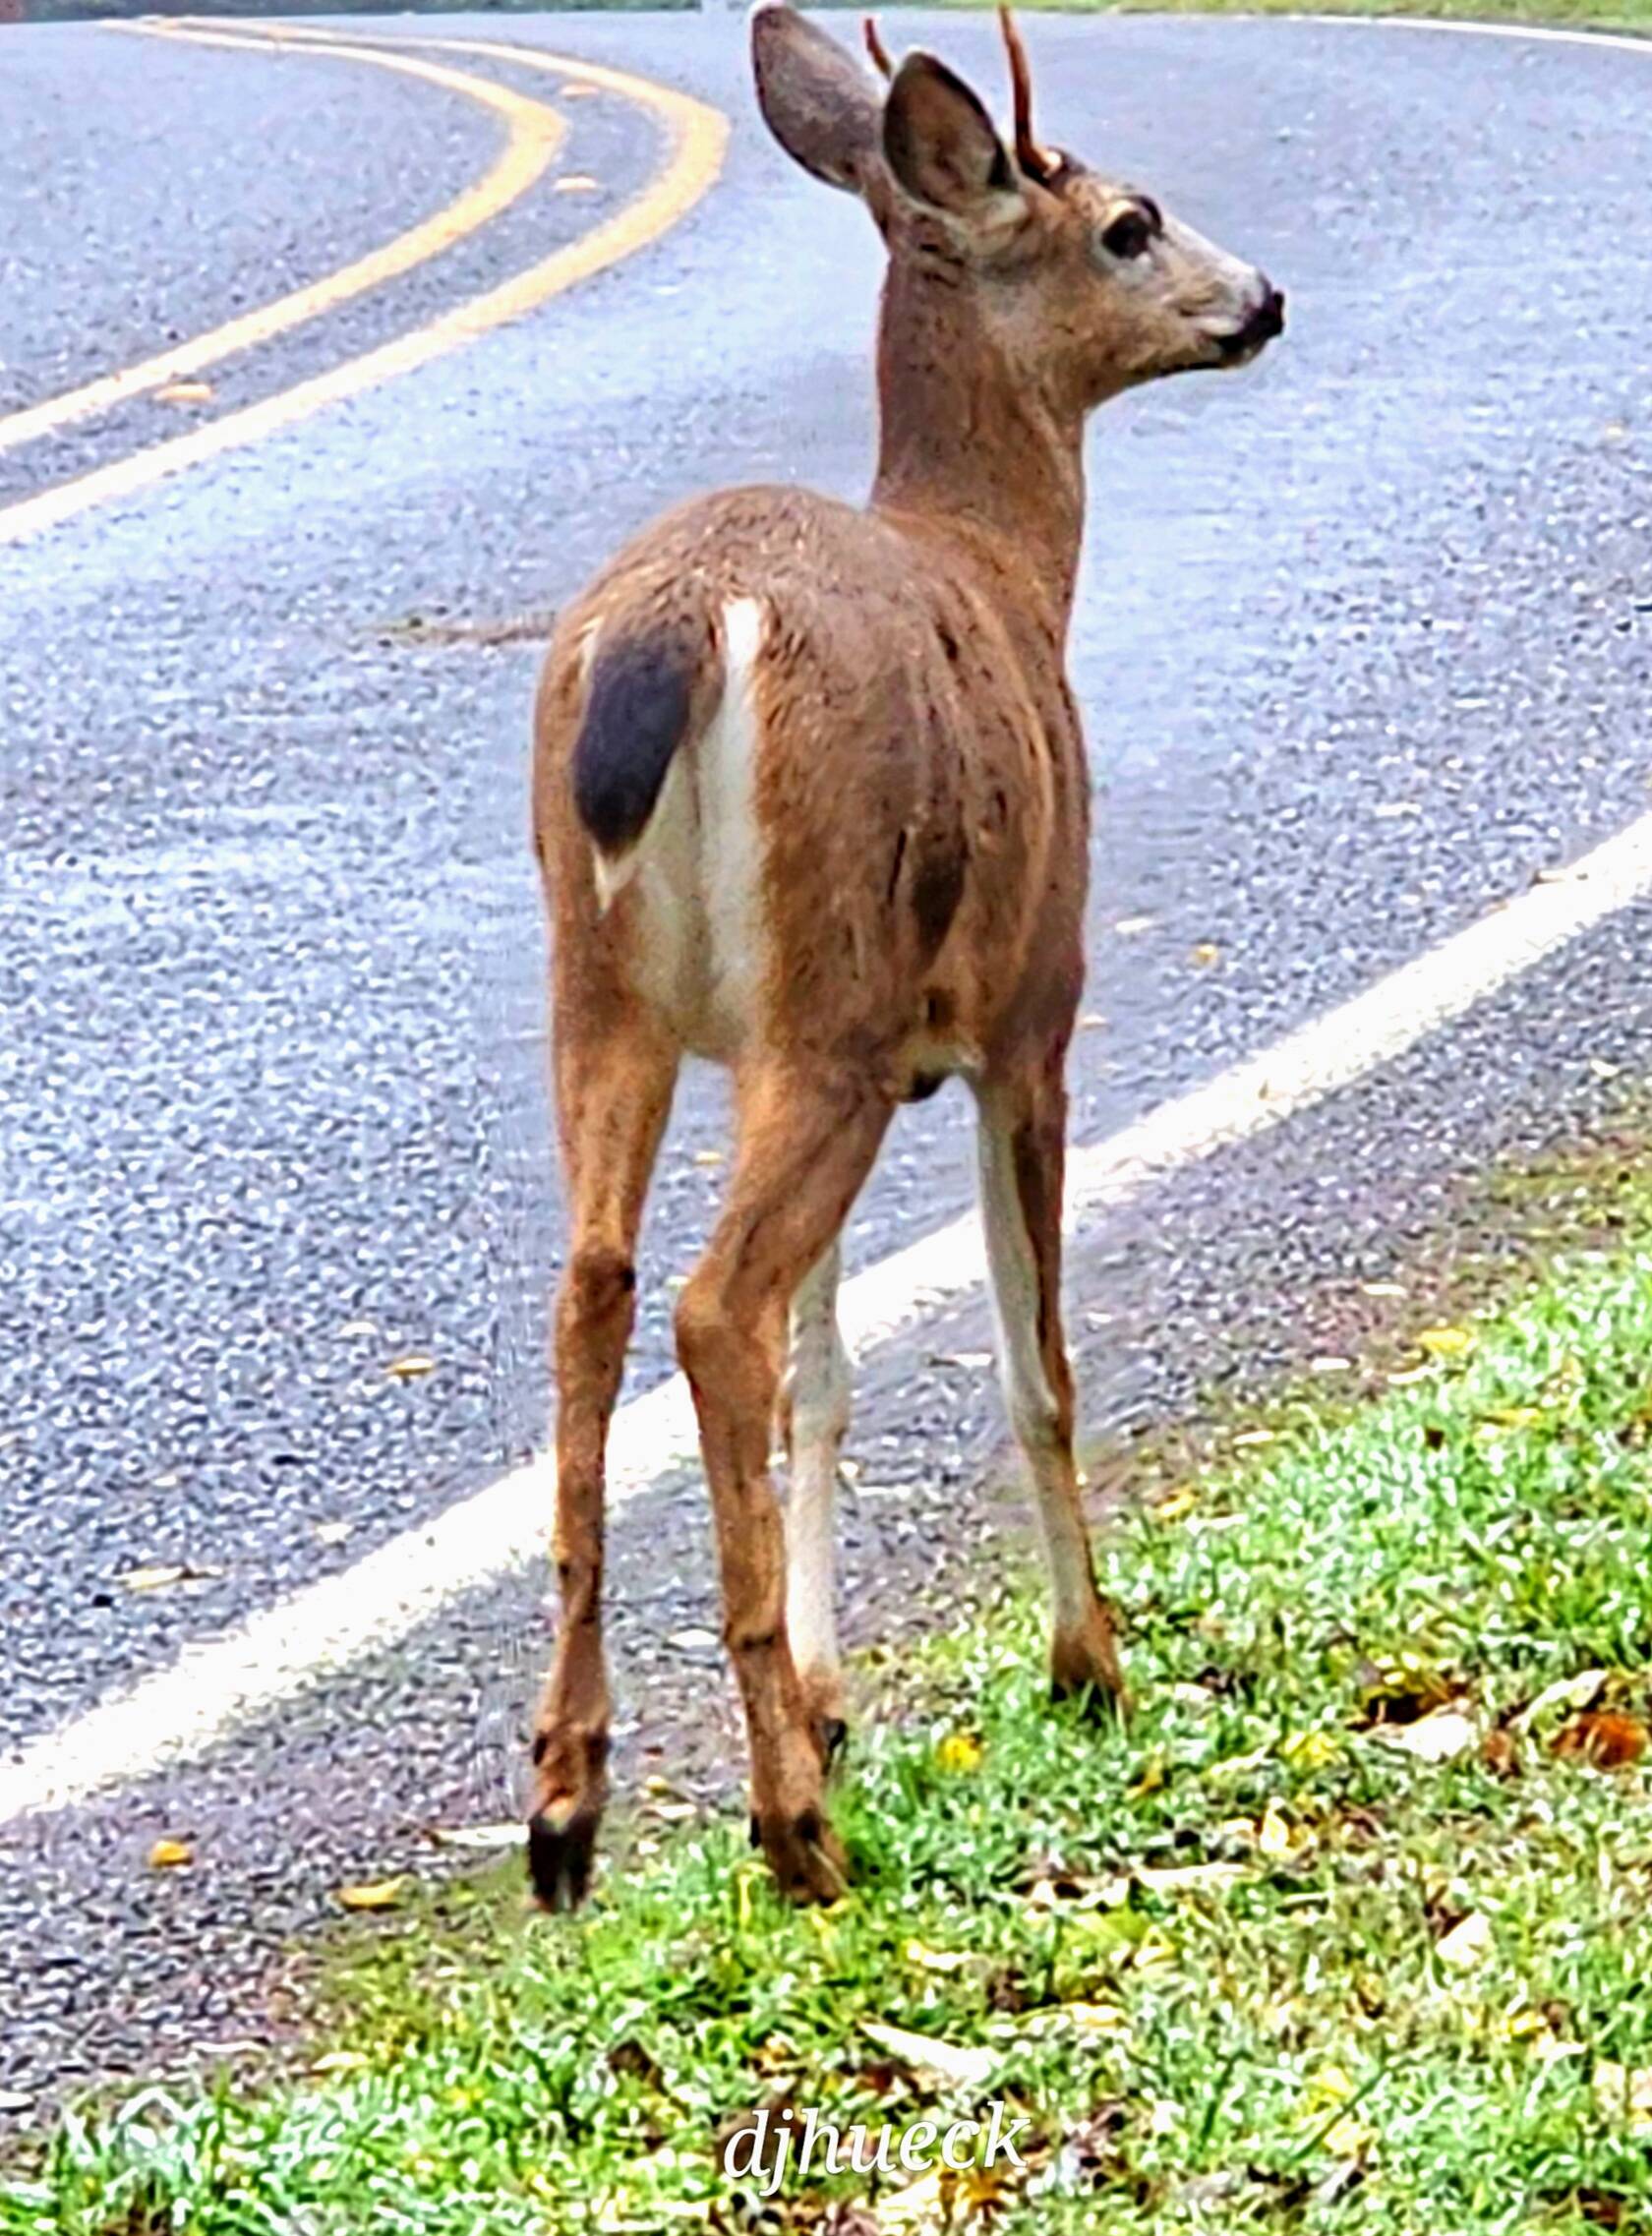 A South Whidbey deer ponders crossing the road. (Photo by Diane Jhueck)